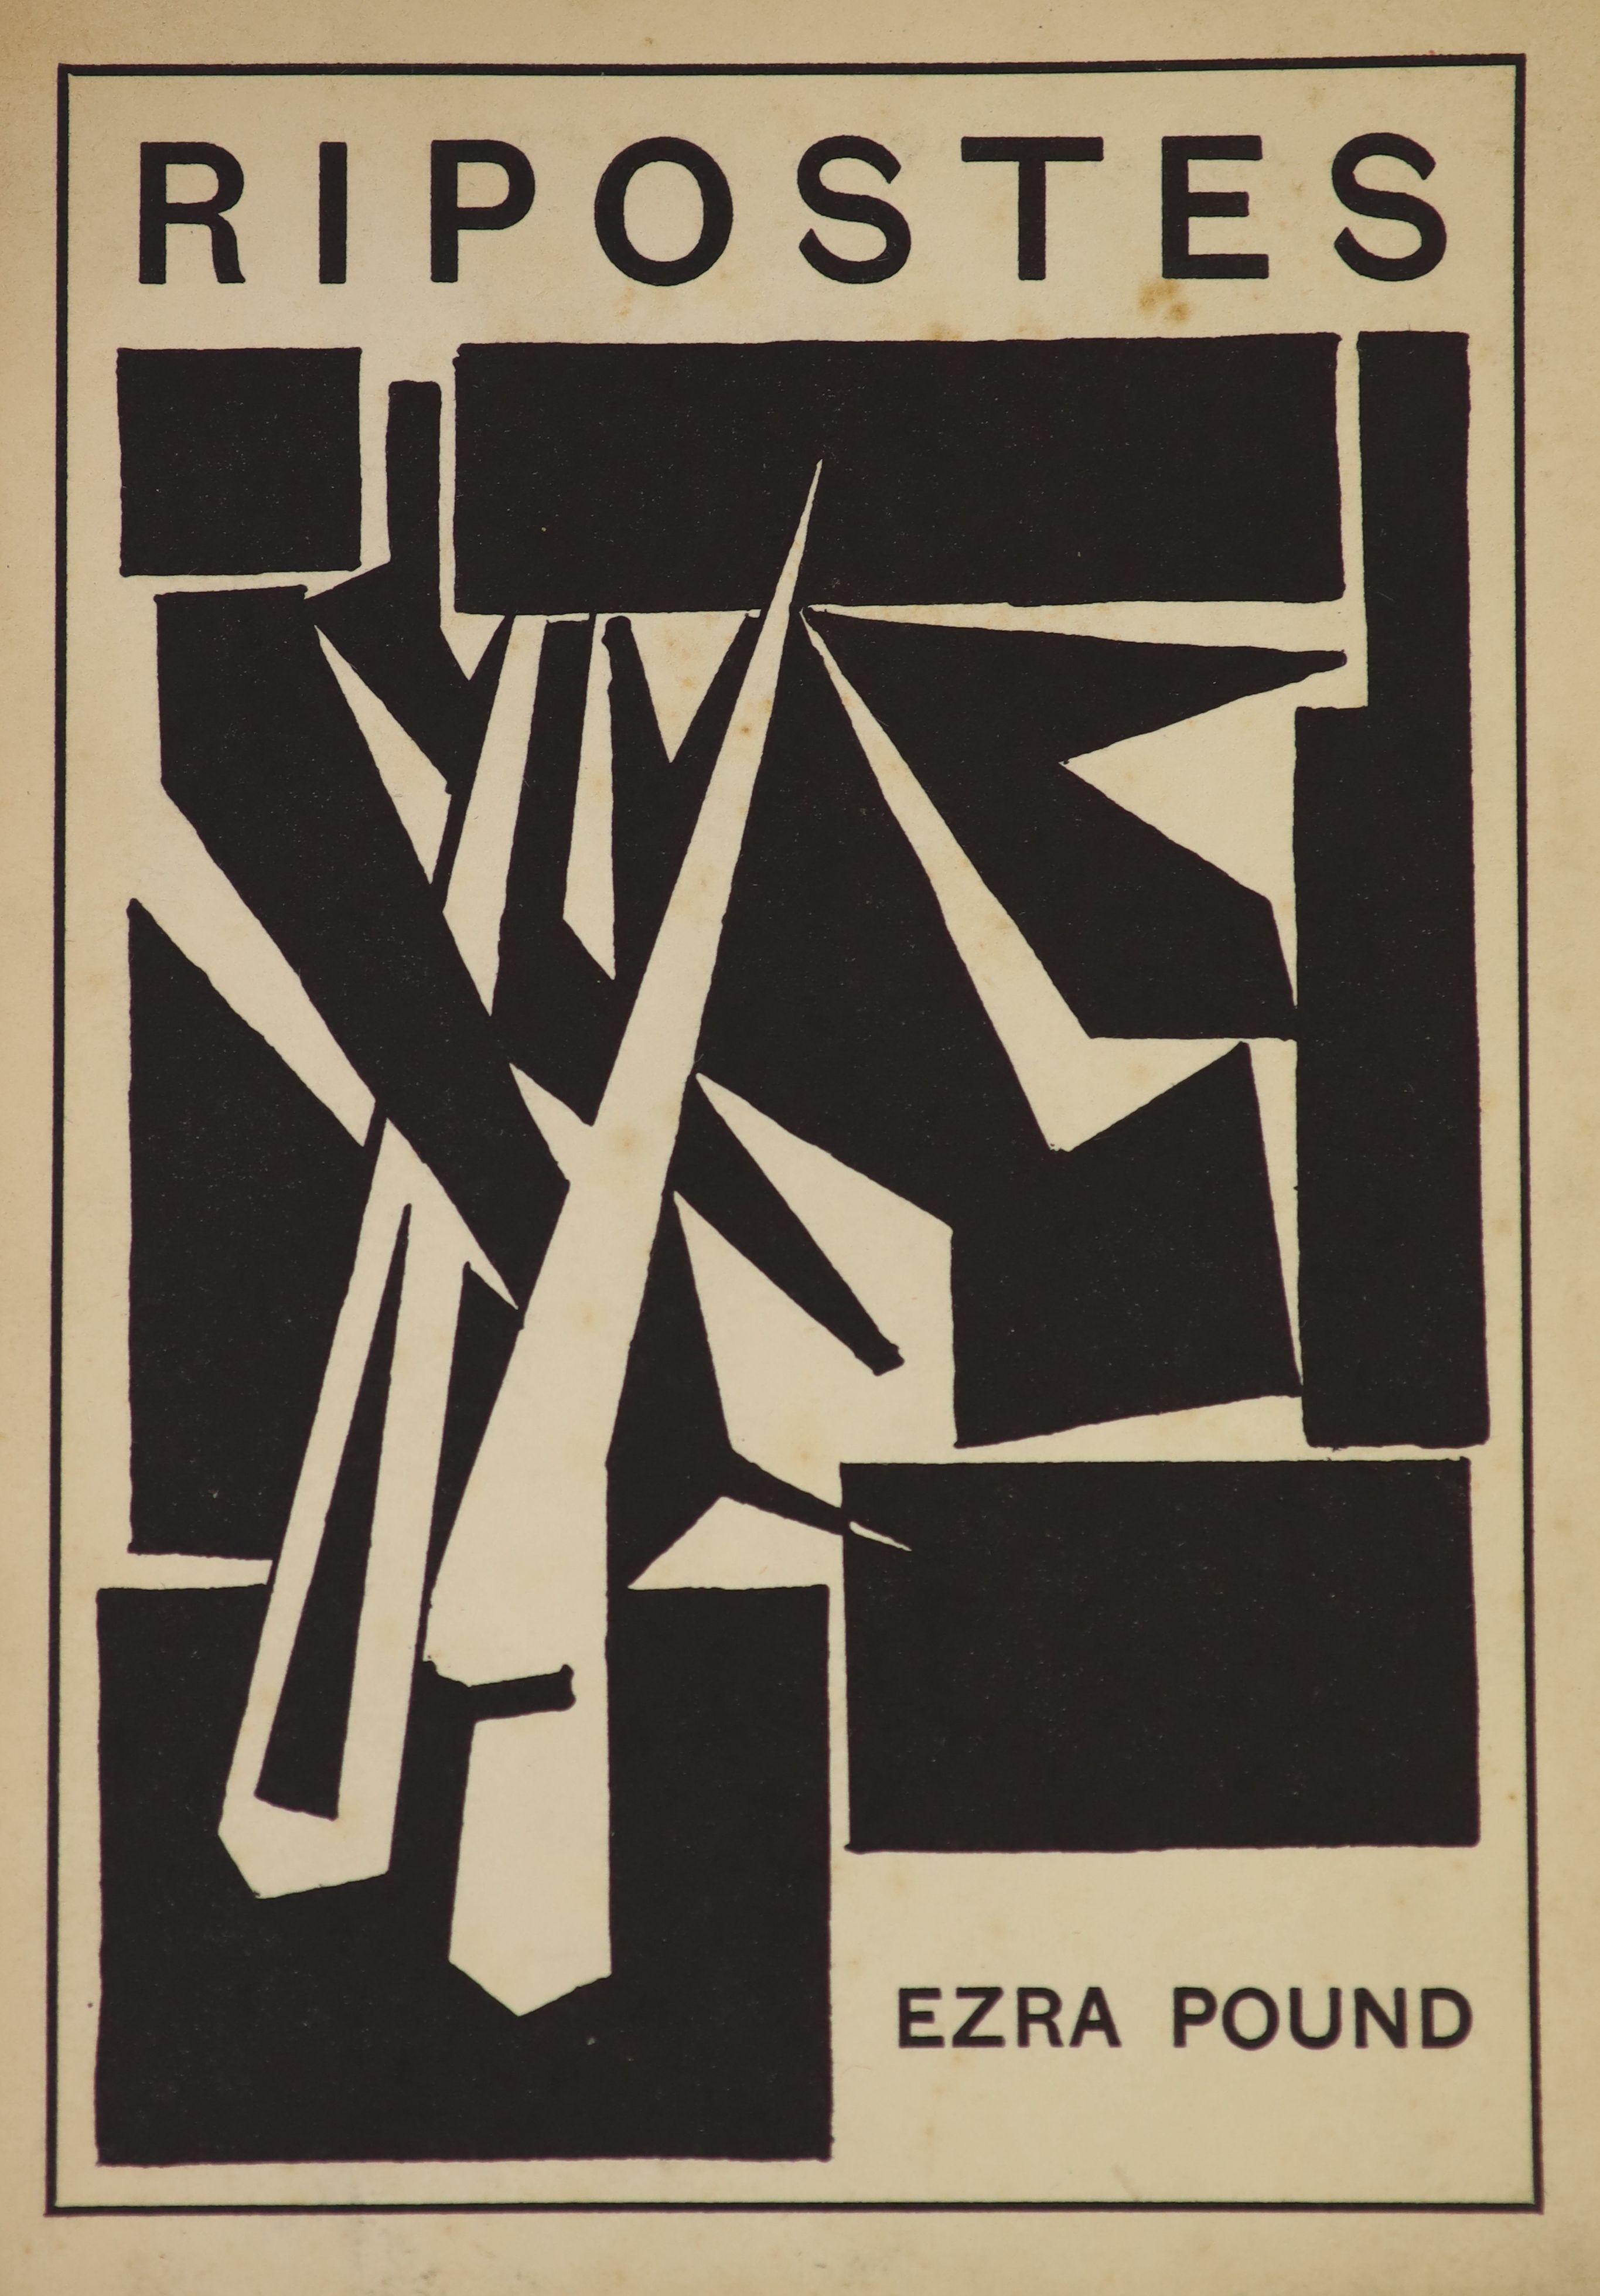 ° Pound, Ezra - Ripostes, 1st edition, one of 400, papers wrappers, with a Cubist design by